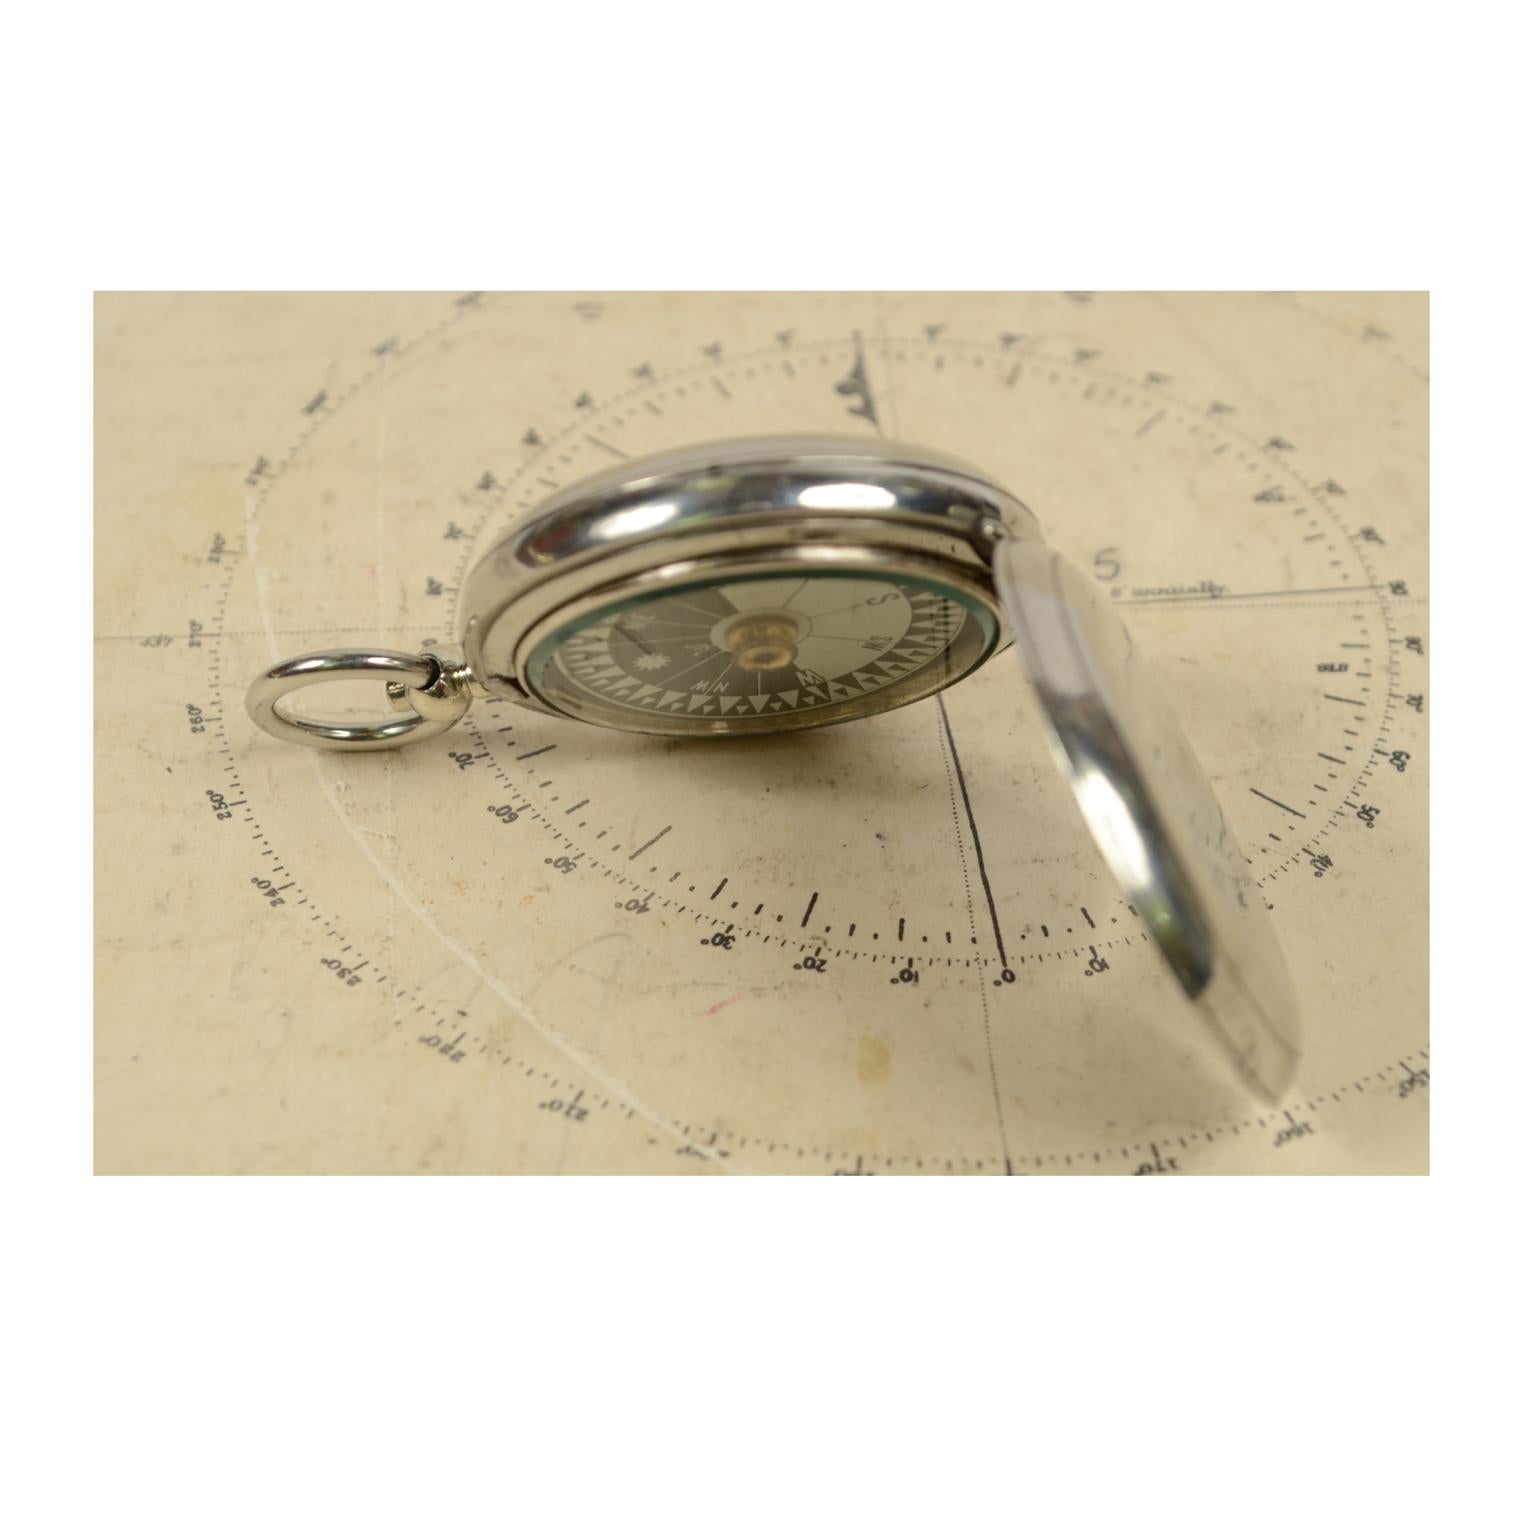 Brass Pocket Compass Used by the Royal Air Force Officers in 1916